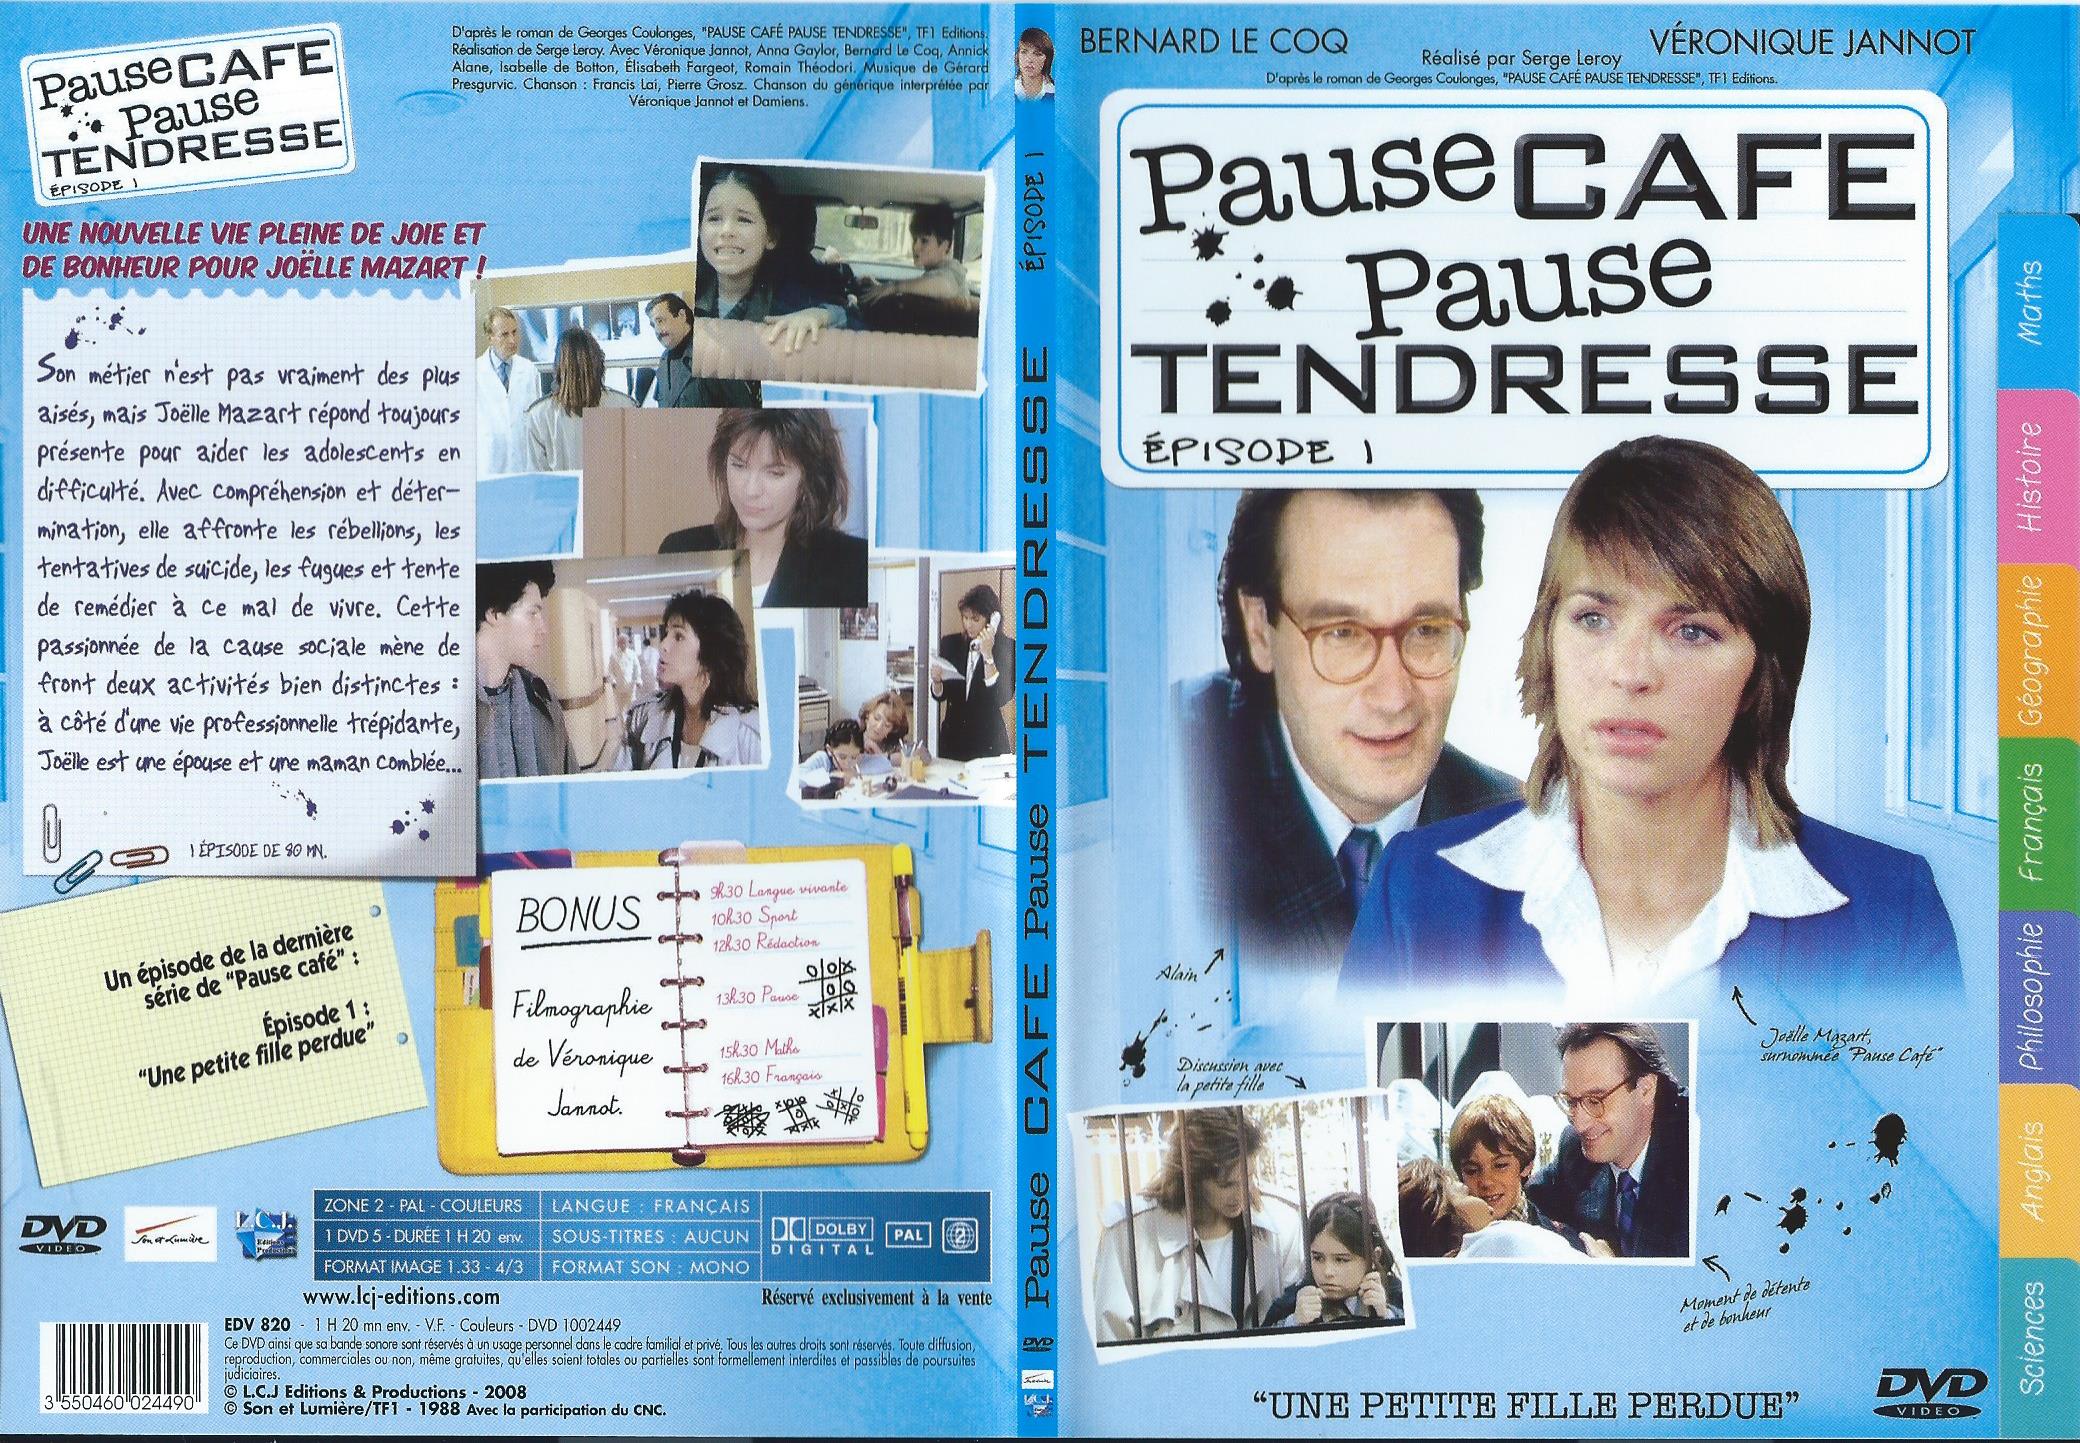 Jaquette DVD Pause Caf, Pause Tendresse DVD 1